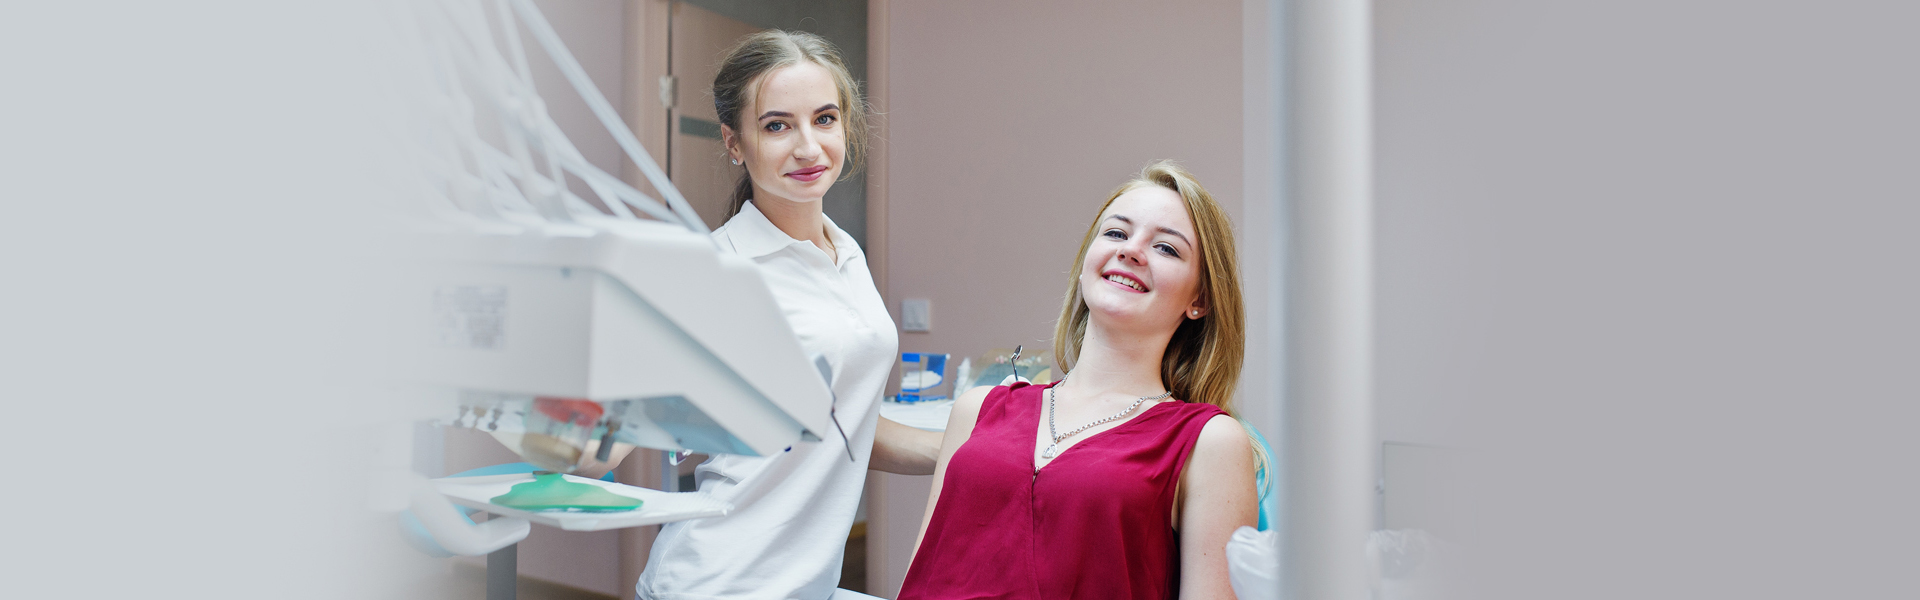 The Importance of Dental checkups and Cleanings in Whitby, ON